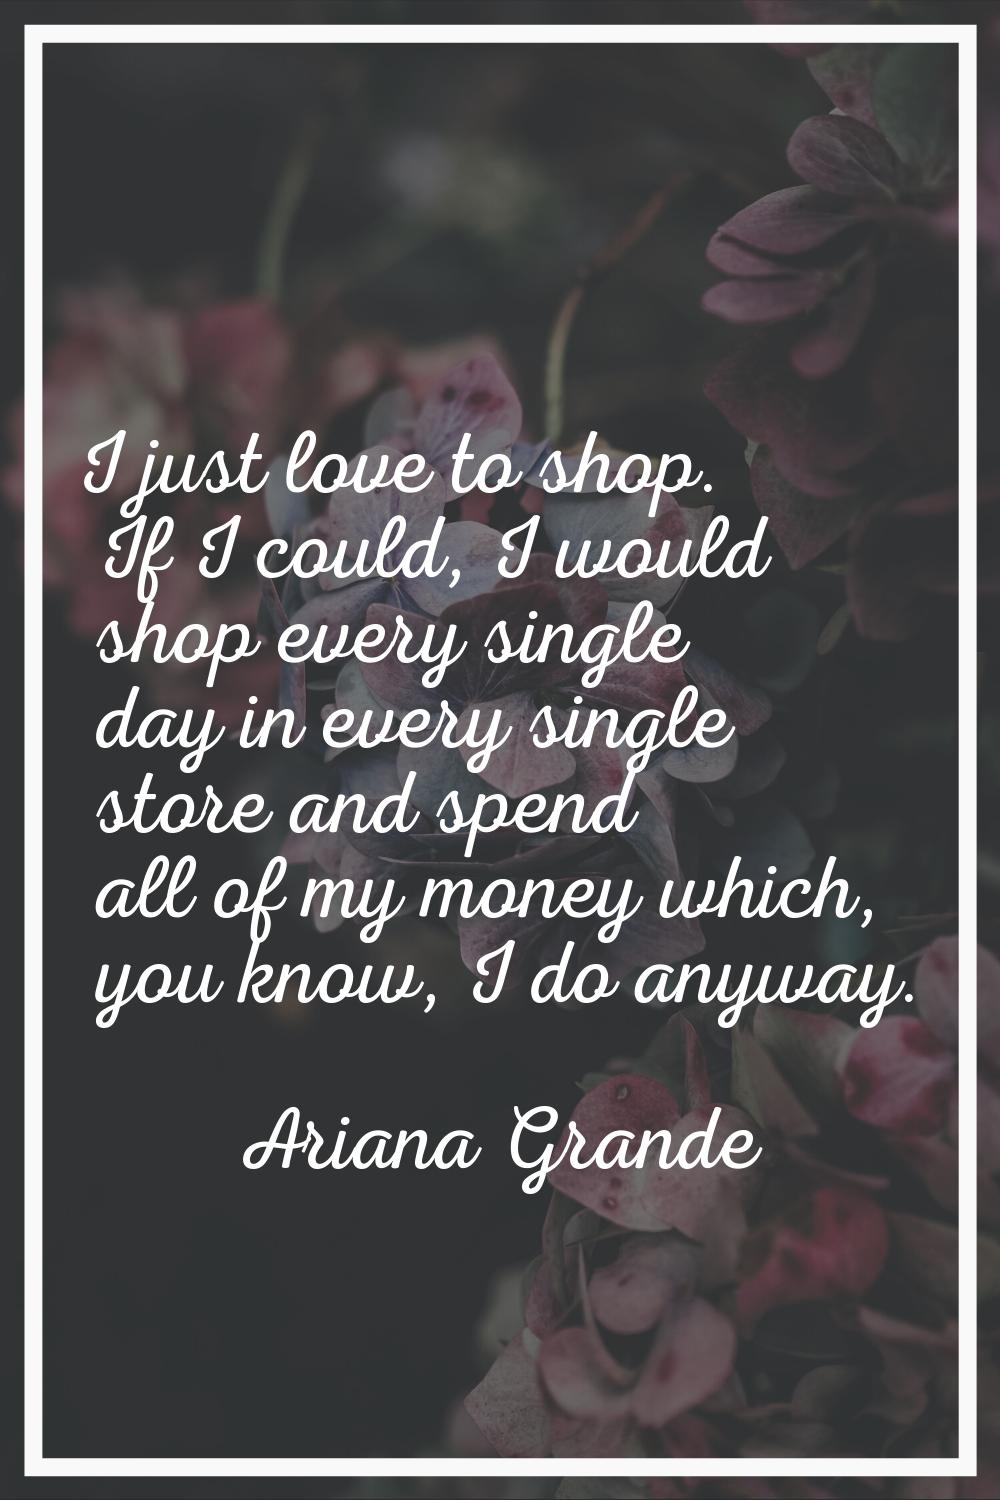 I just love to shop. If I could, I would shop every single day in every single store and spend all 